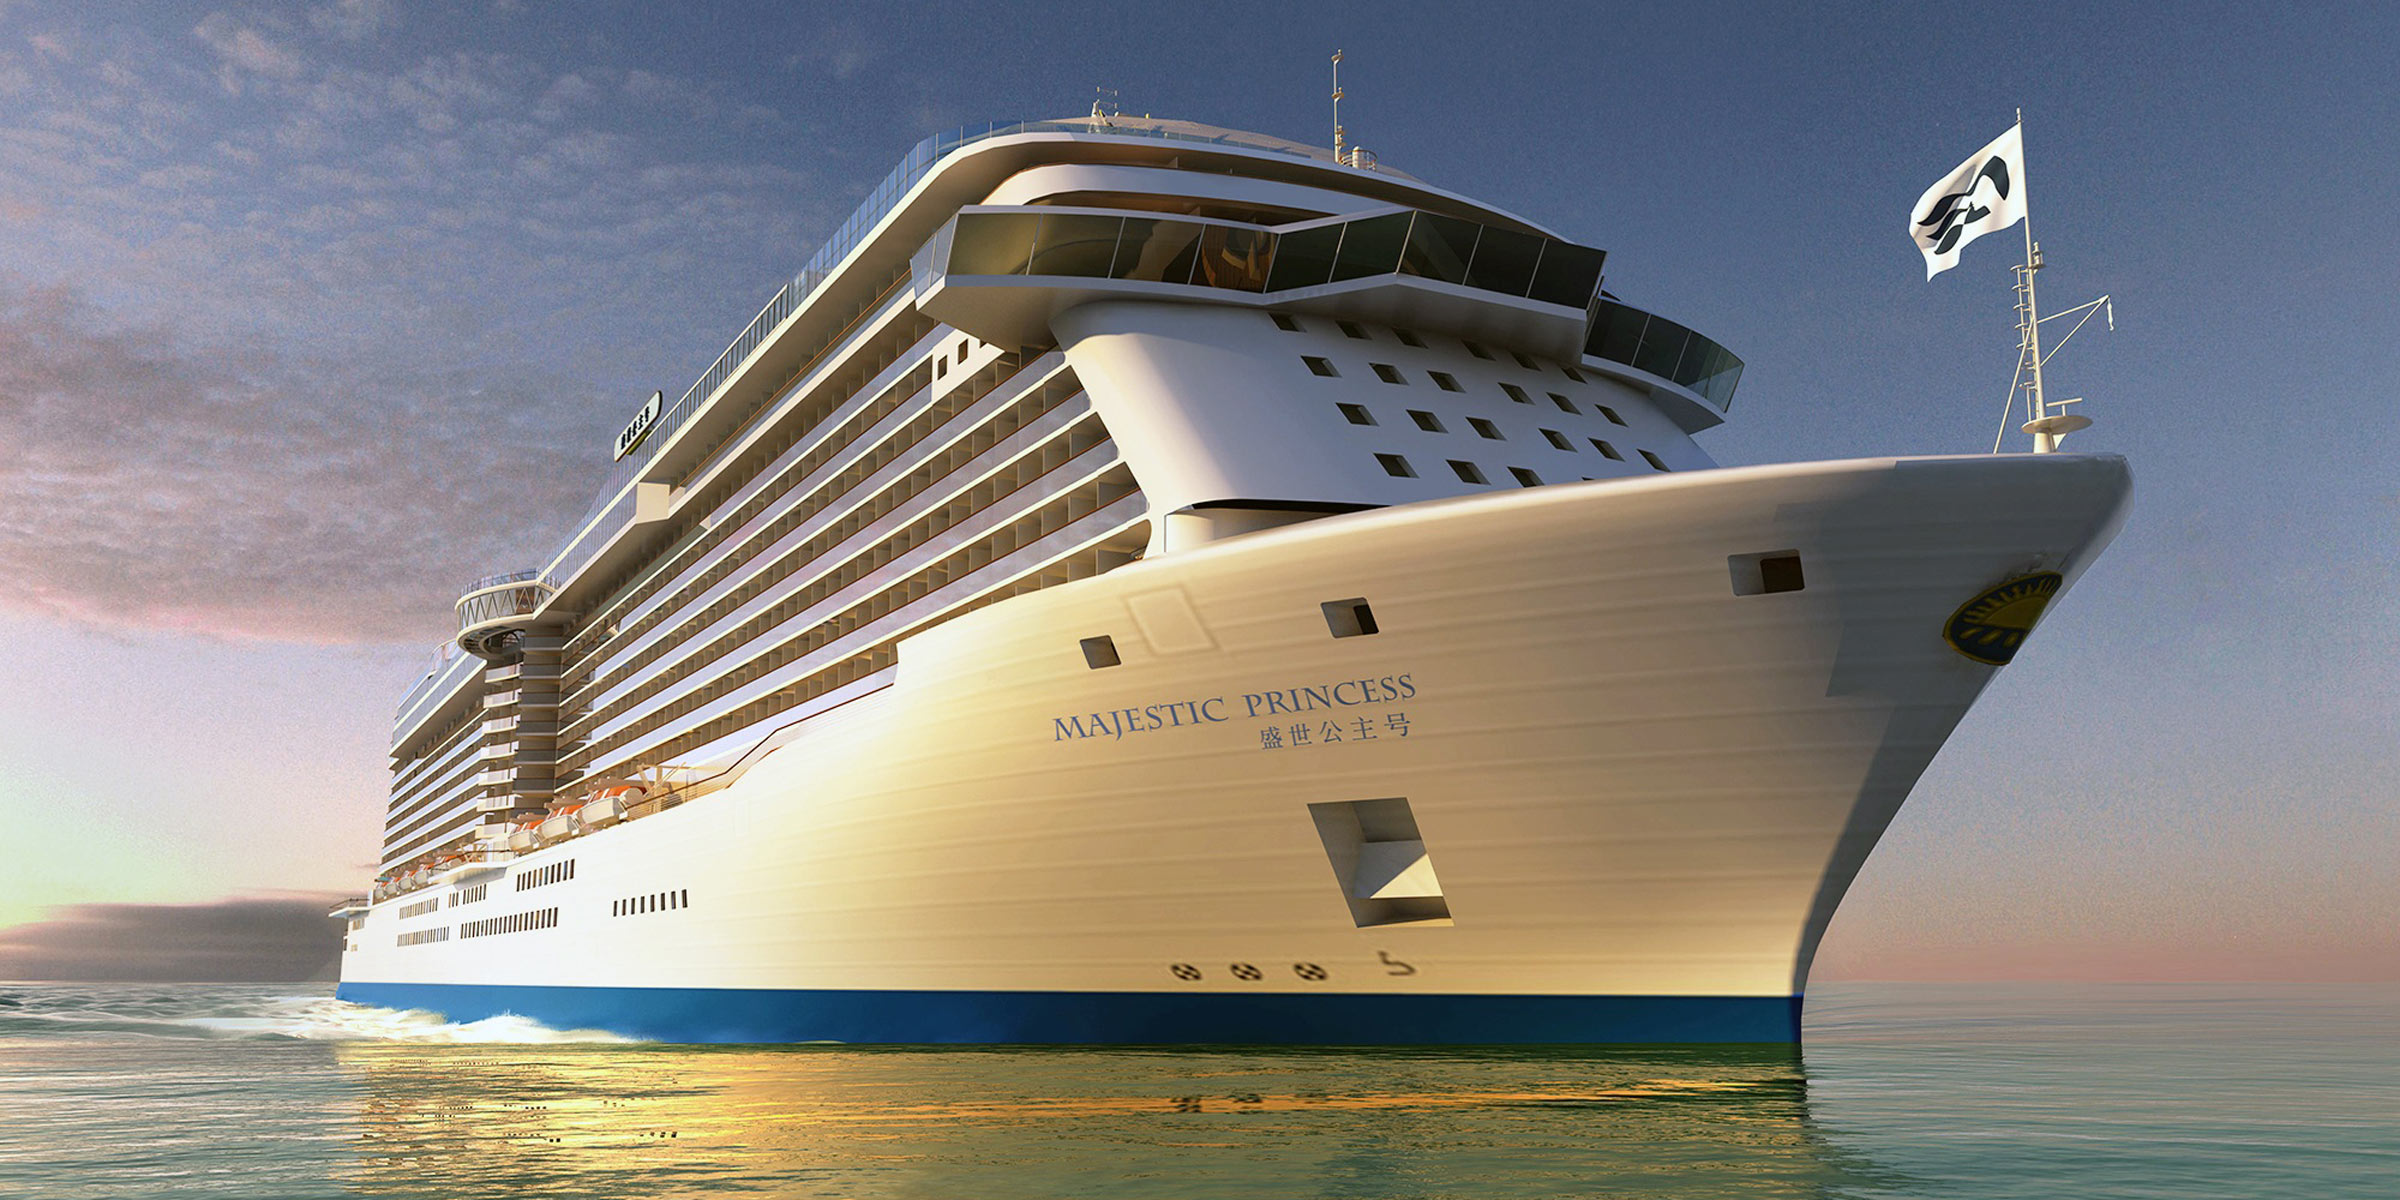 Amazing Majestic Princess Pictures & Backgrounds